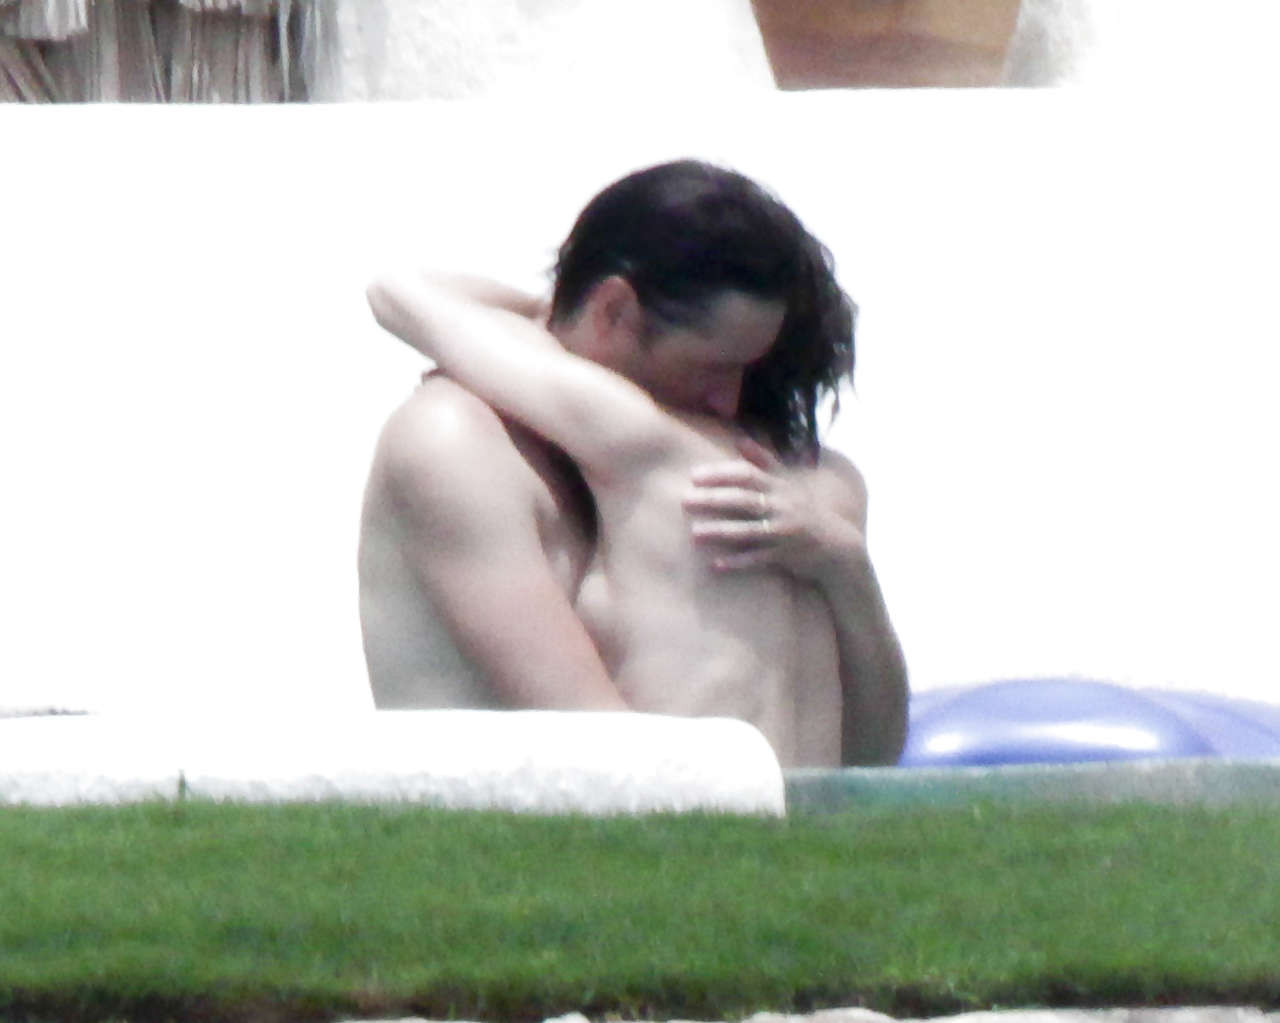 Milla Jovovich caught topless in pool by paparazzi and giving them middle finger #75289843